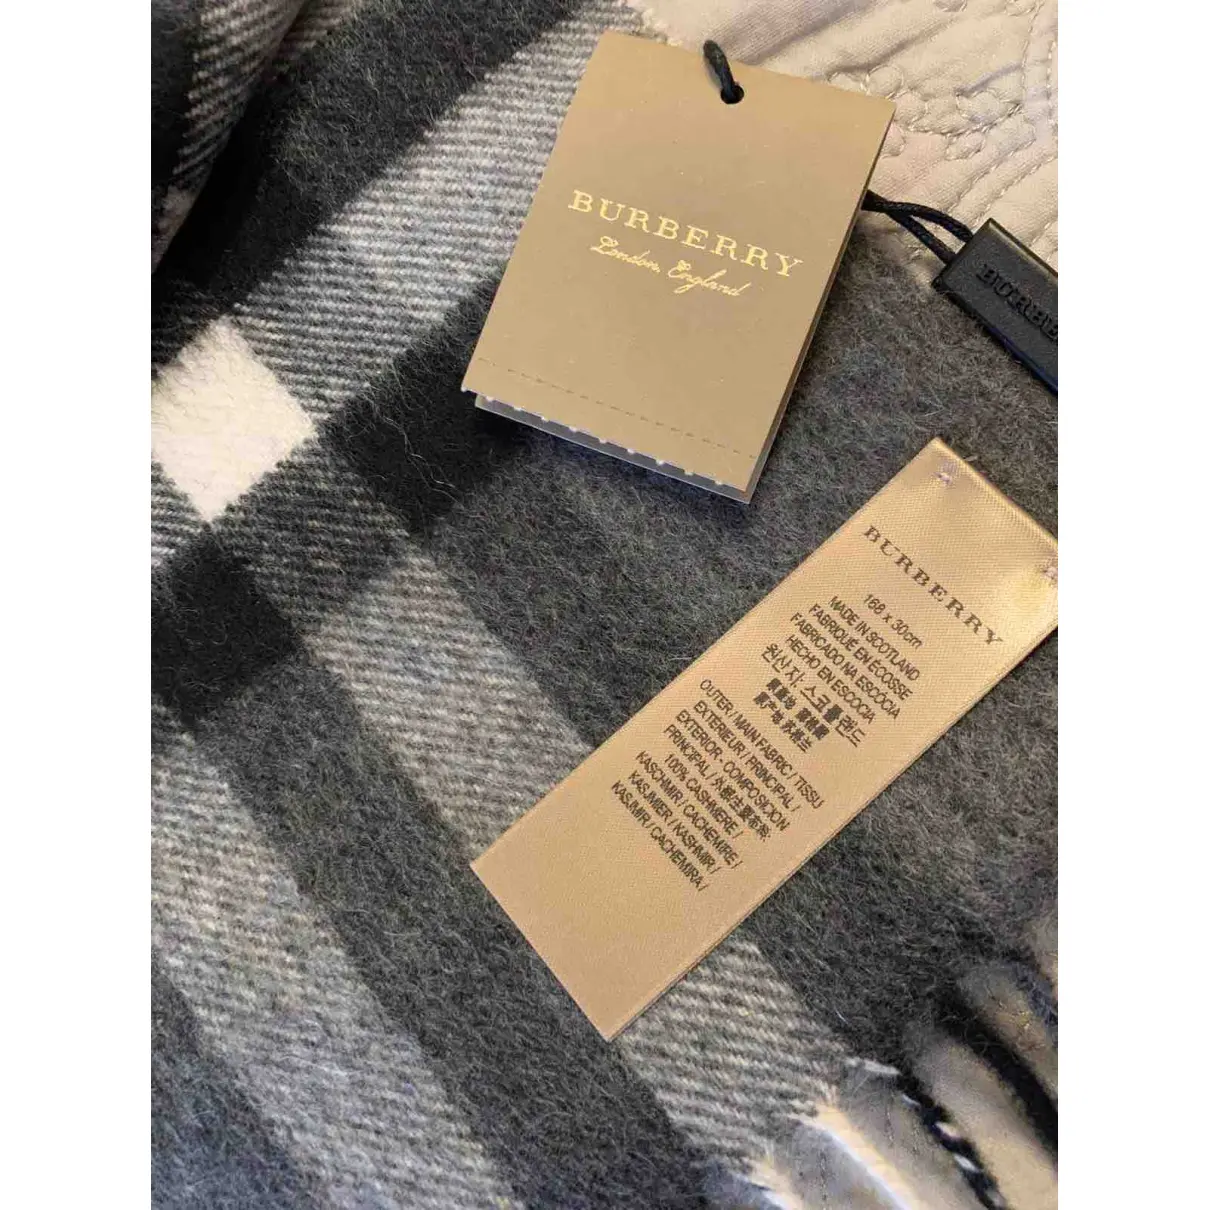 Buy Burberry Cashmere scarf & pocket square online